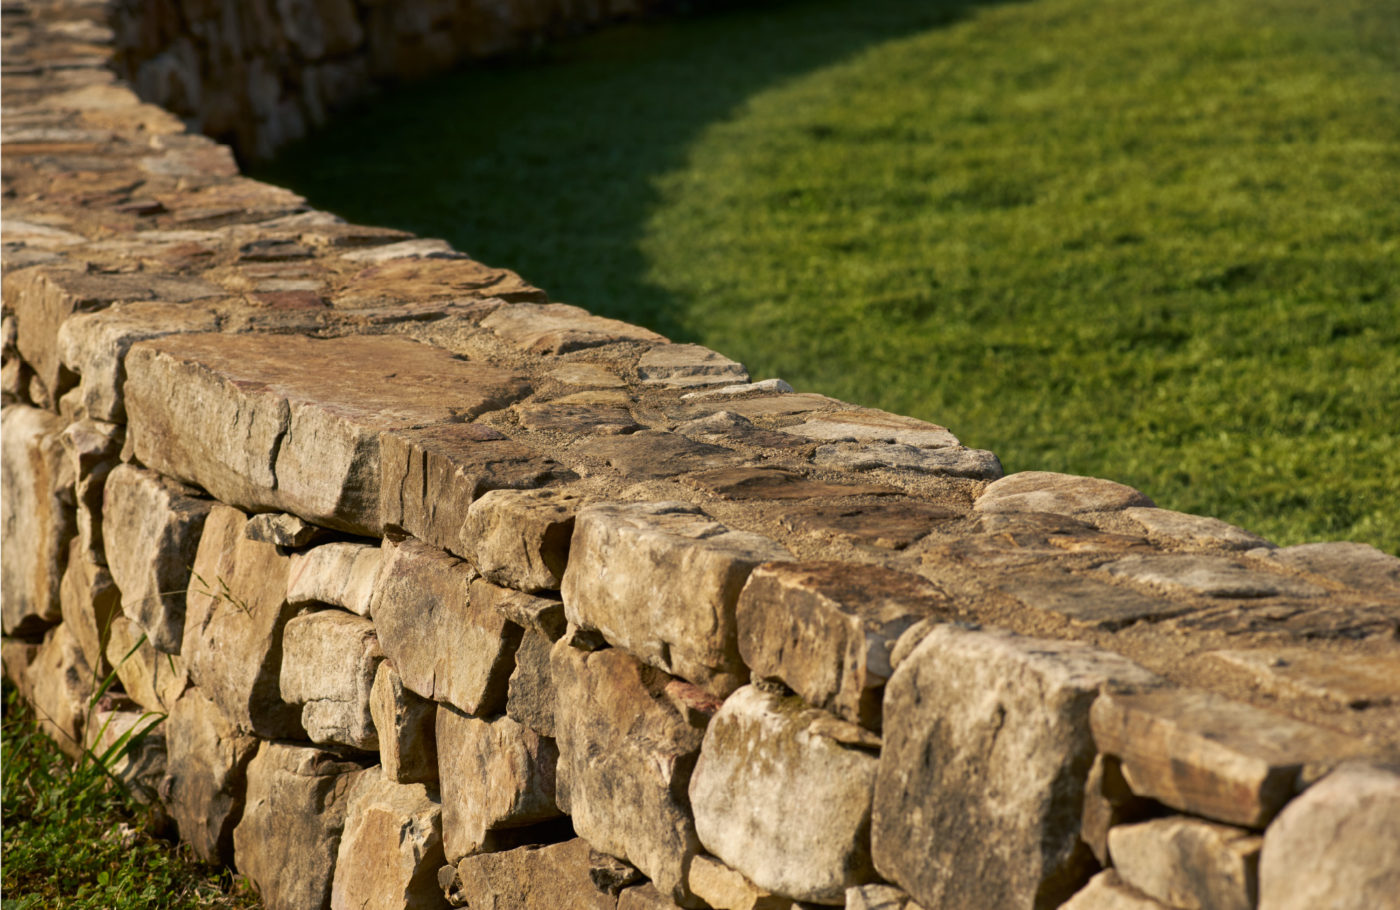 A detail photo of a low, curving stone wall.